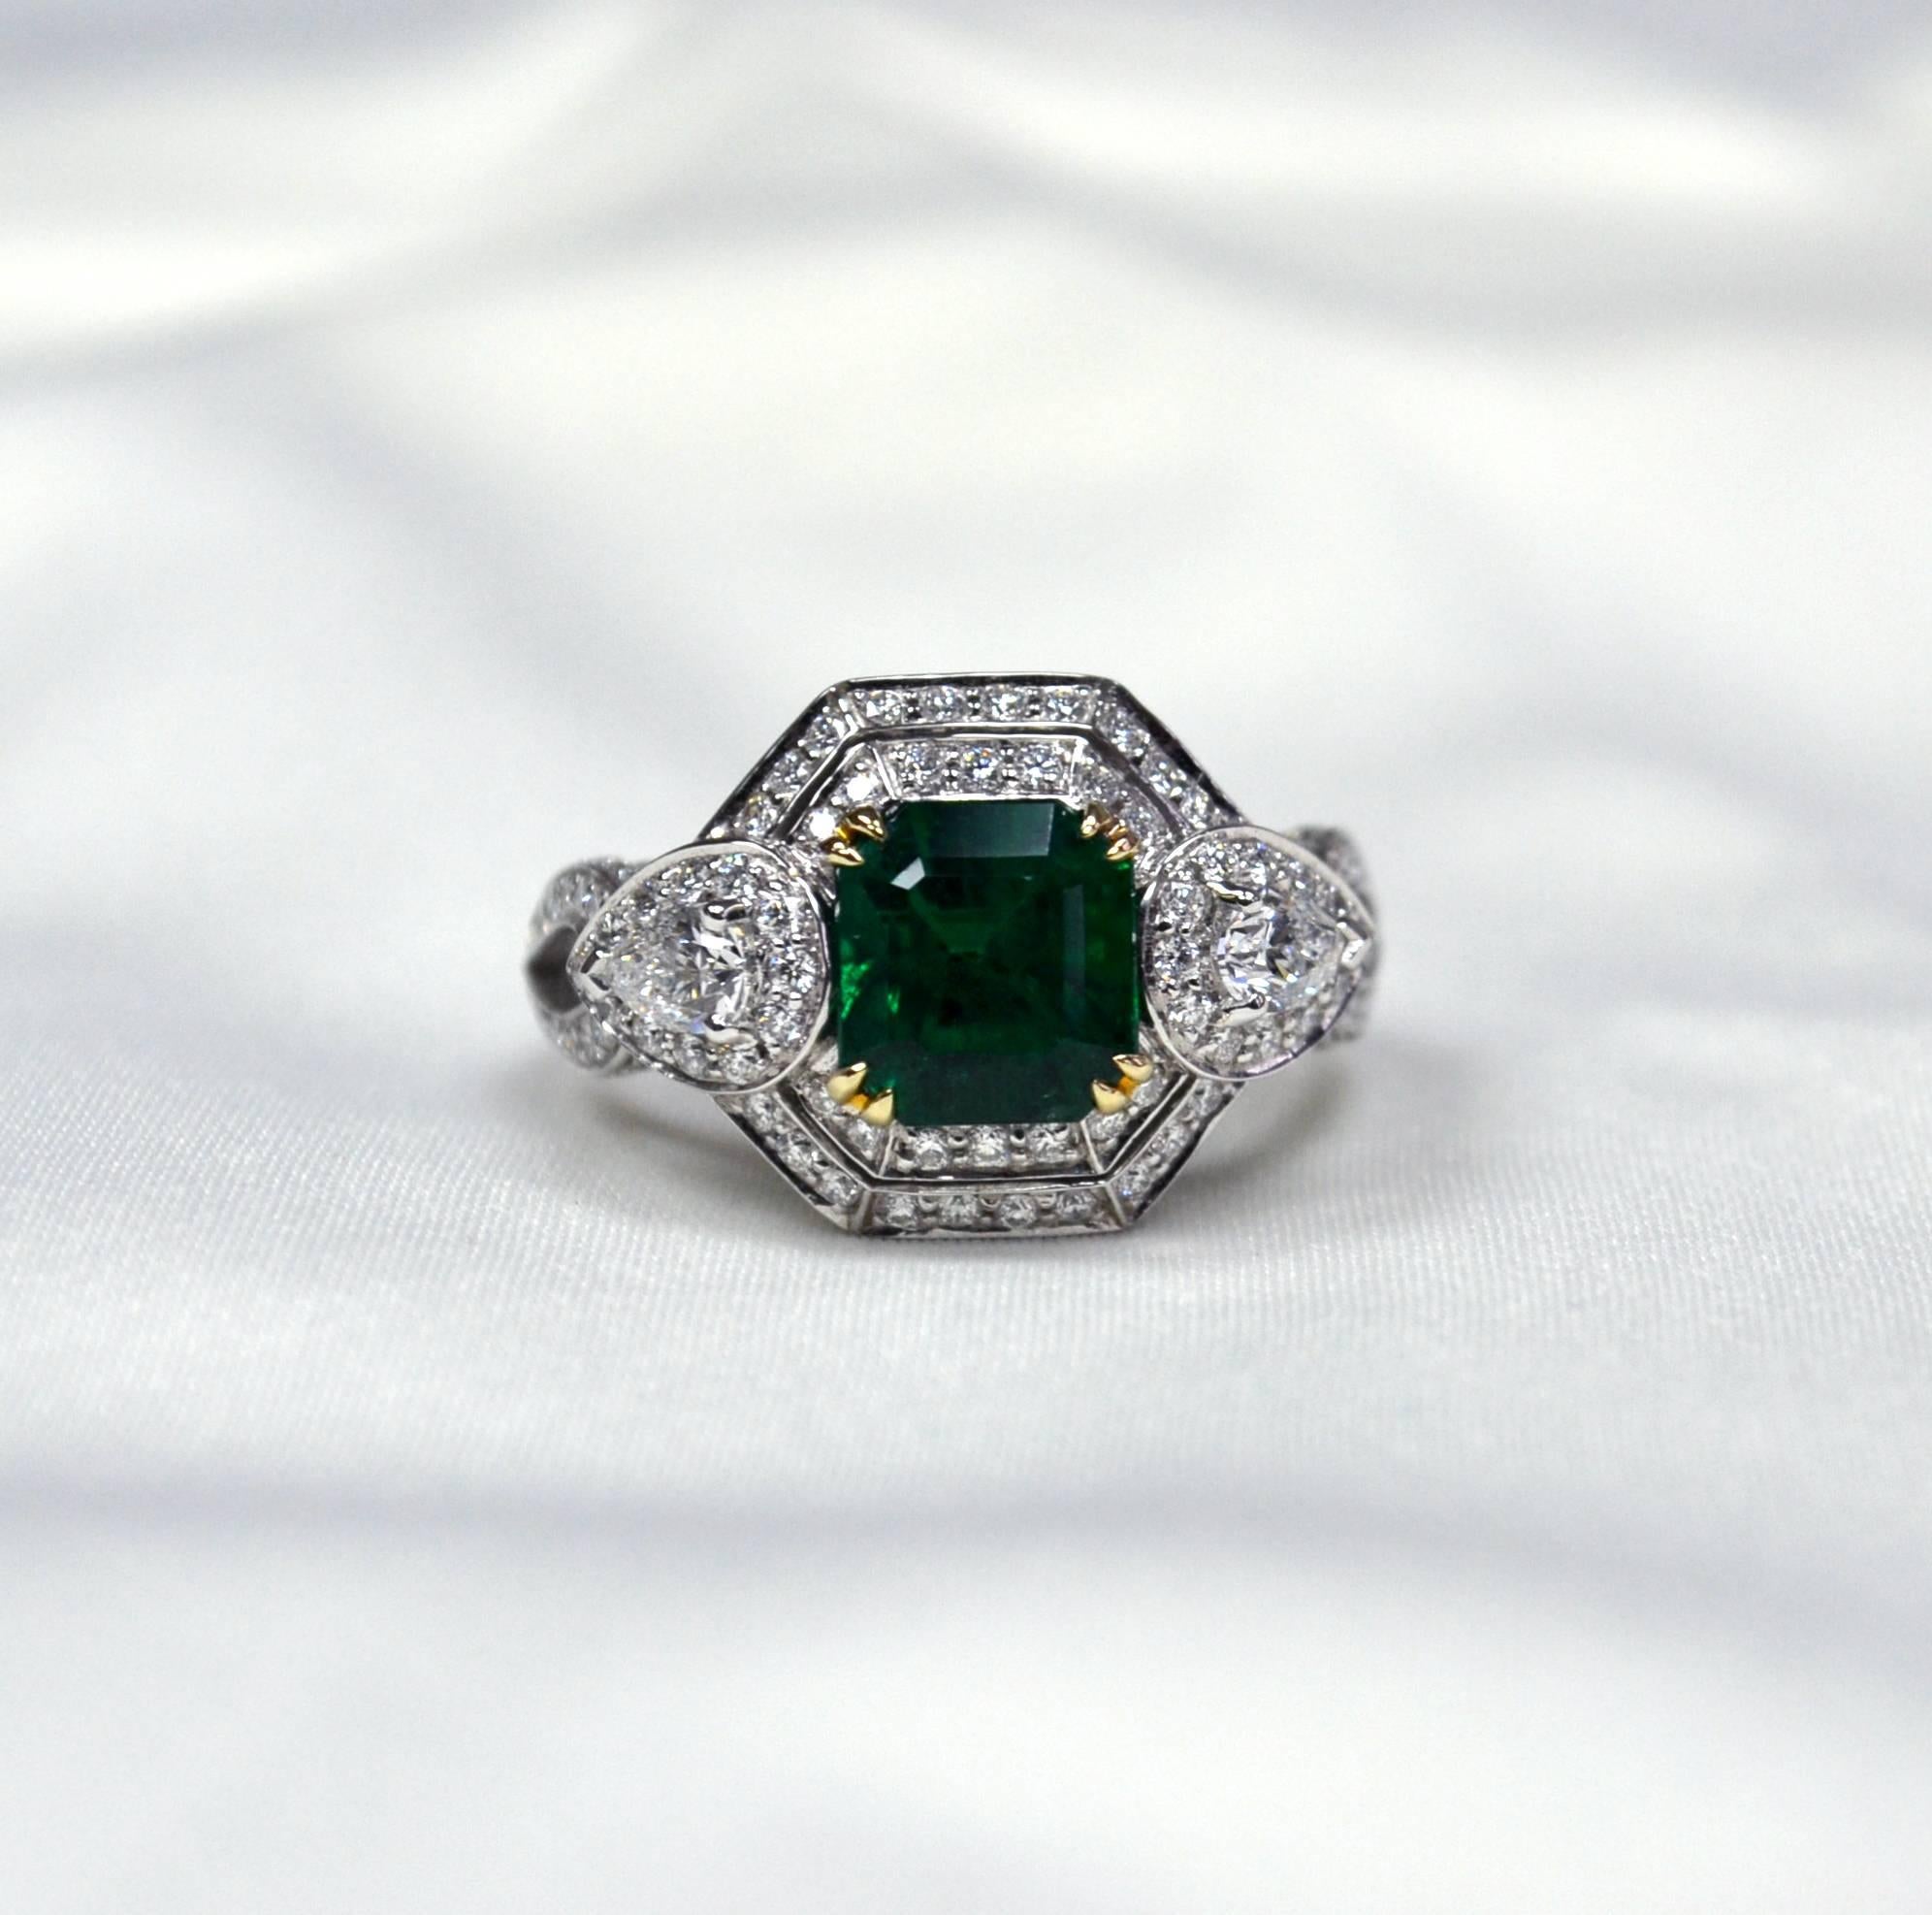 Emerald Cut Emerald Diamond 18 Karat Gold Engagement Ring In New Condition For Sale In New York, NY